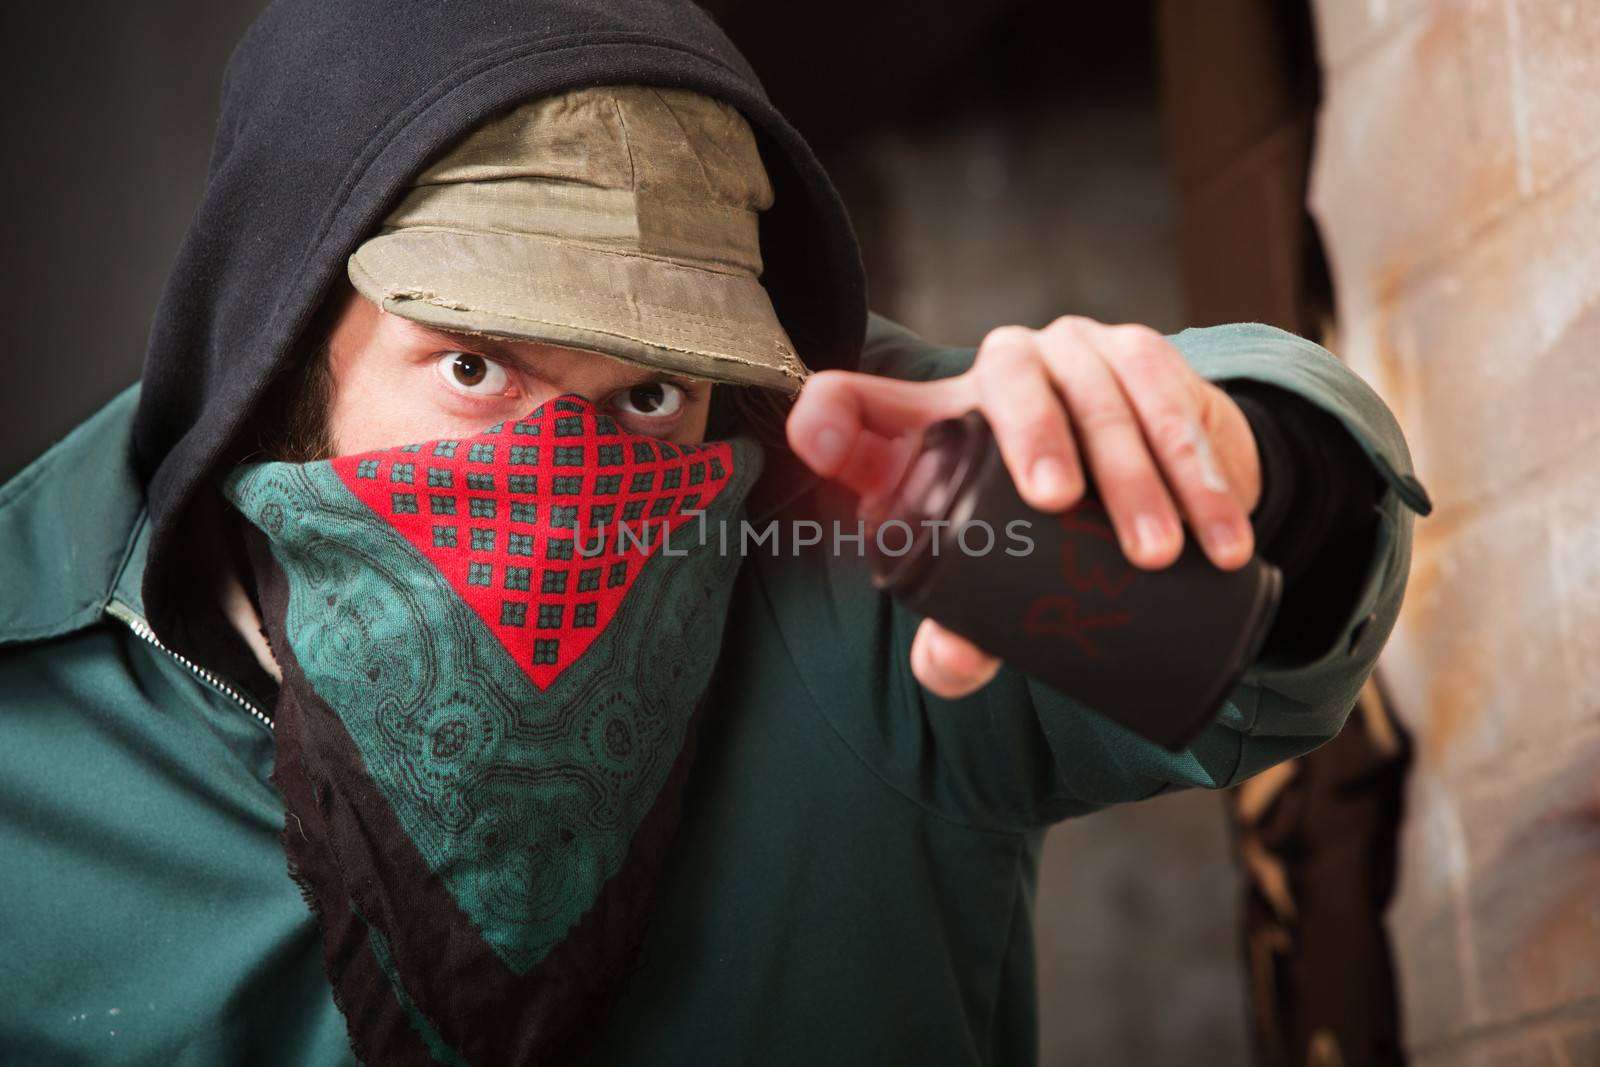 Tough gang member with spray paint can